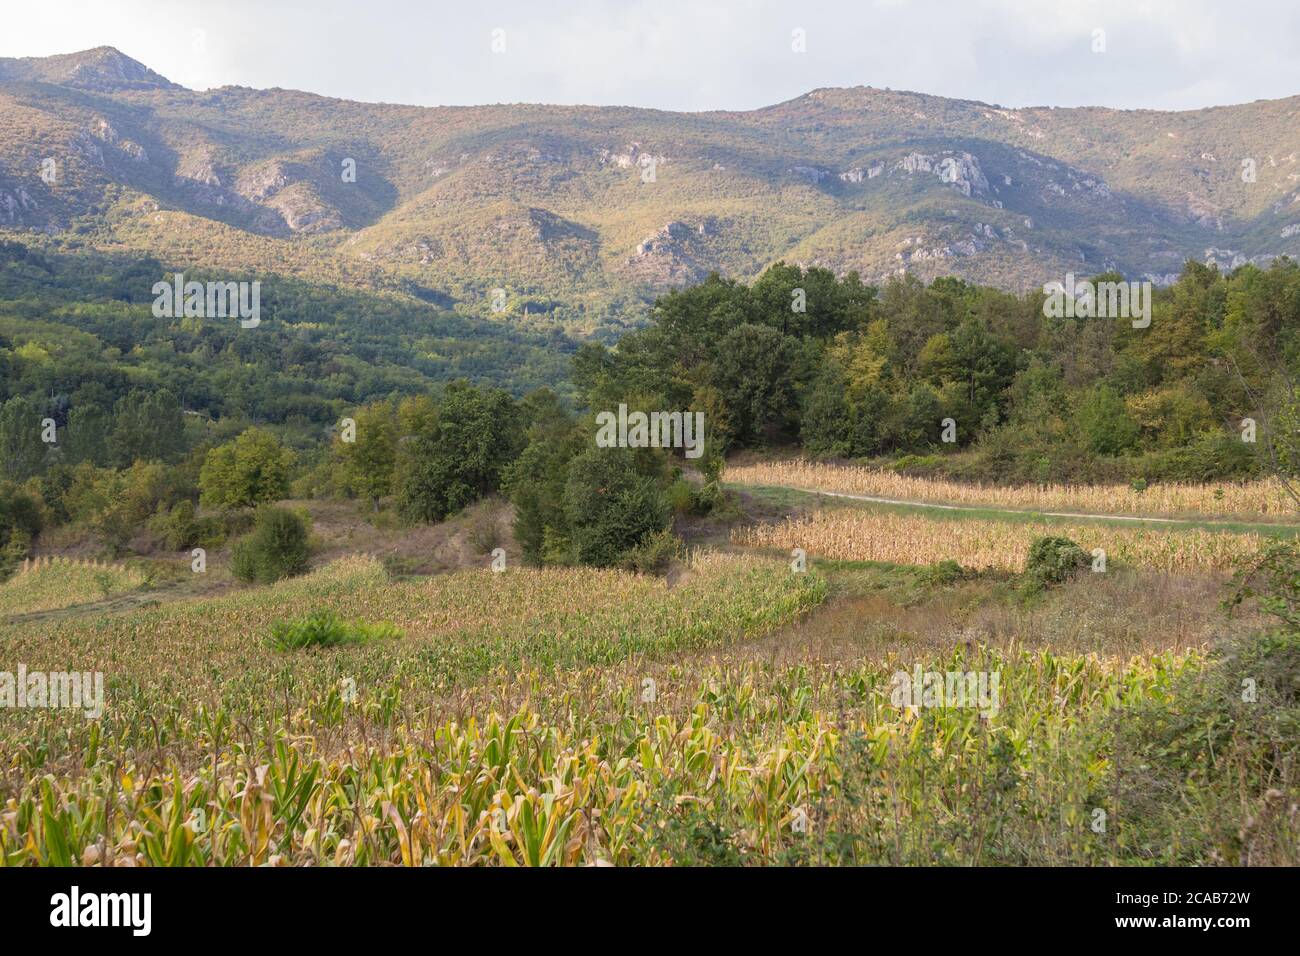 Panorama of mounts of the Suva planina, a chain of mountains and hills in Balkans, in Southeastern Serbia, with forests, hills and agricultural fields Stock Photo